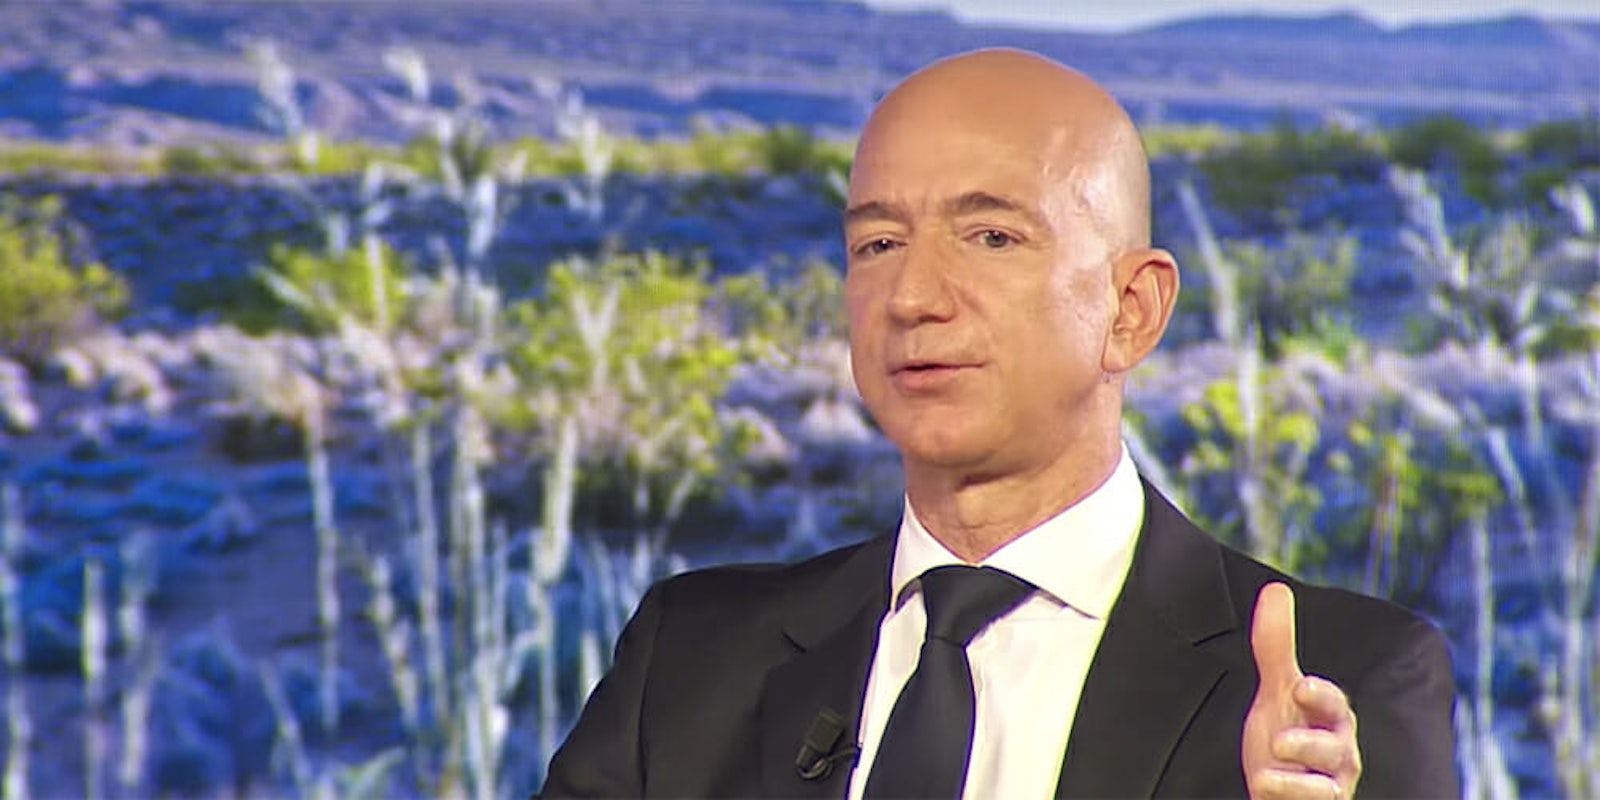 Jeff Bezos is accusing David Pecker, owner of National Enquirer parent company AMI, of blackmailing him over nude photos.